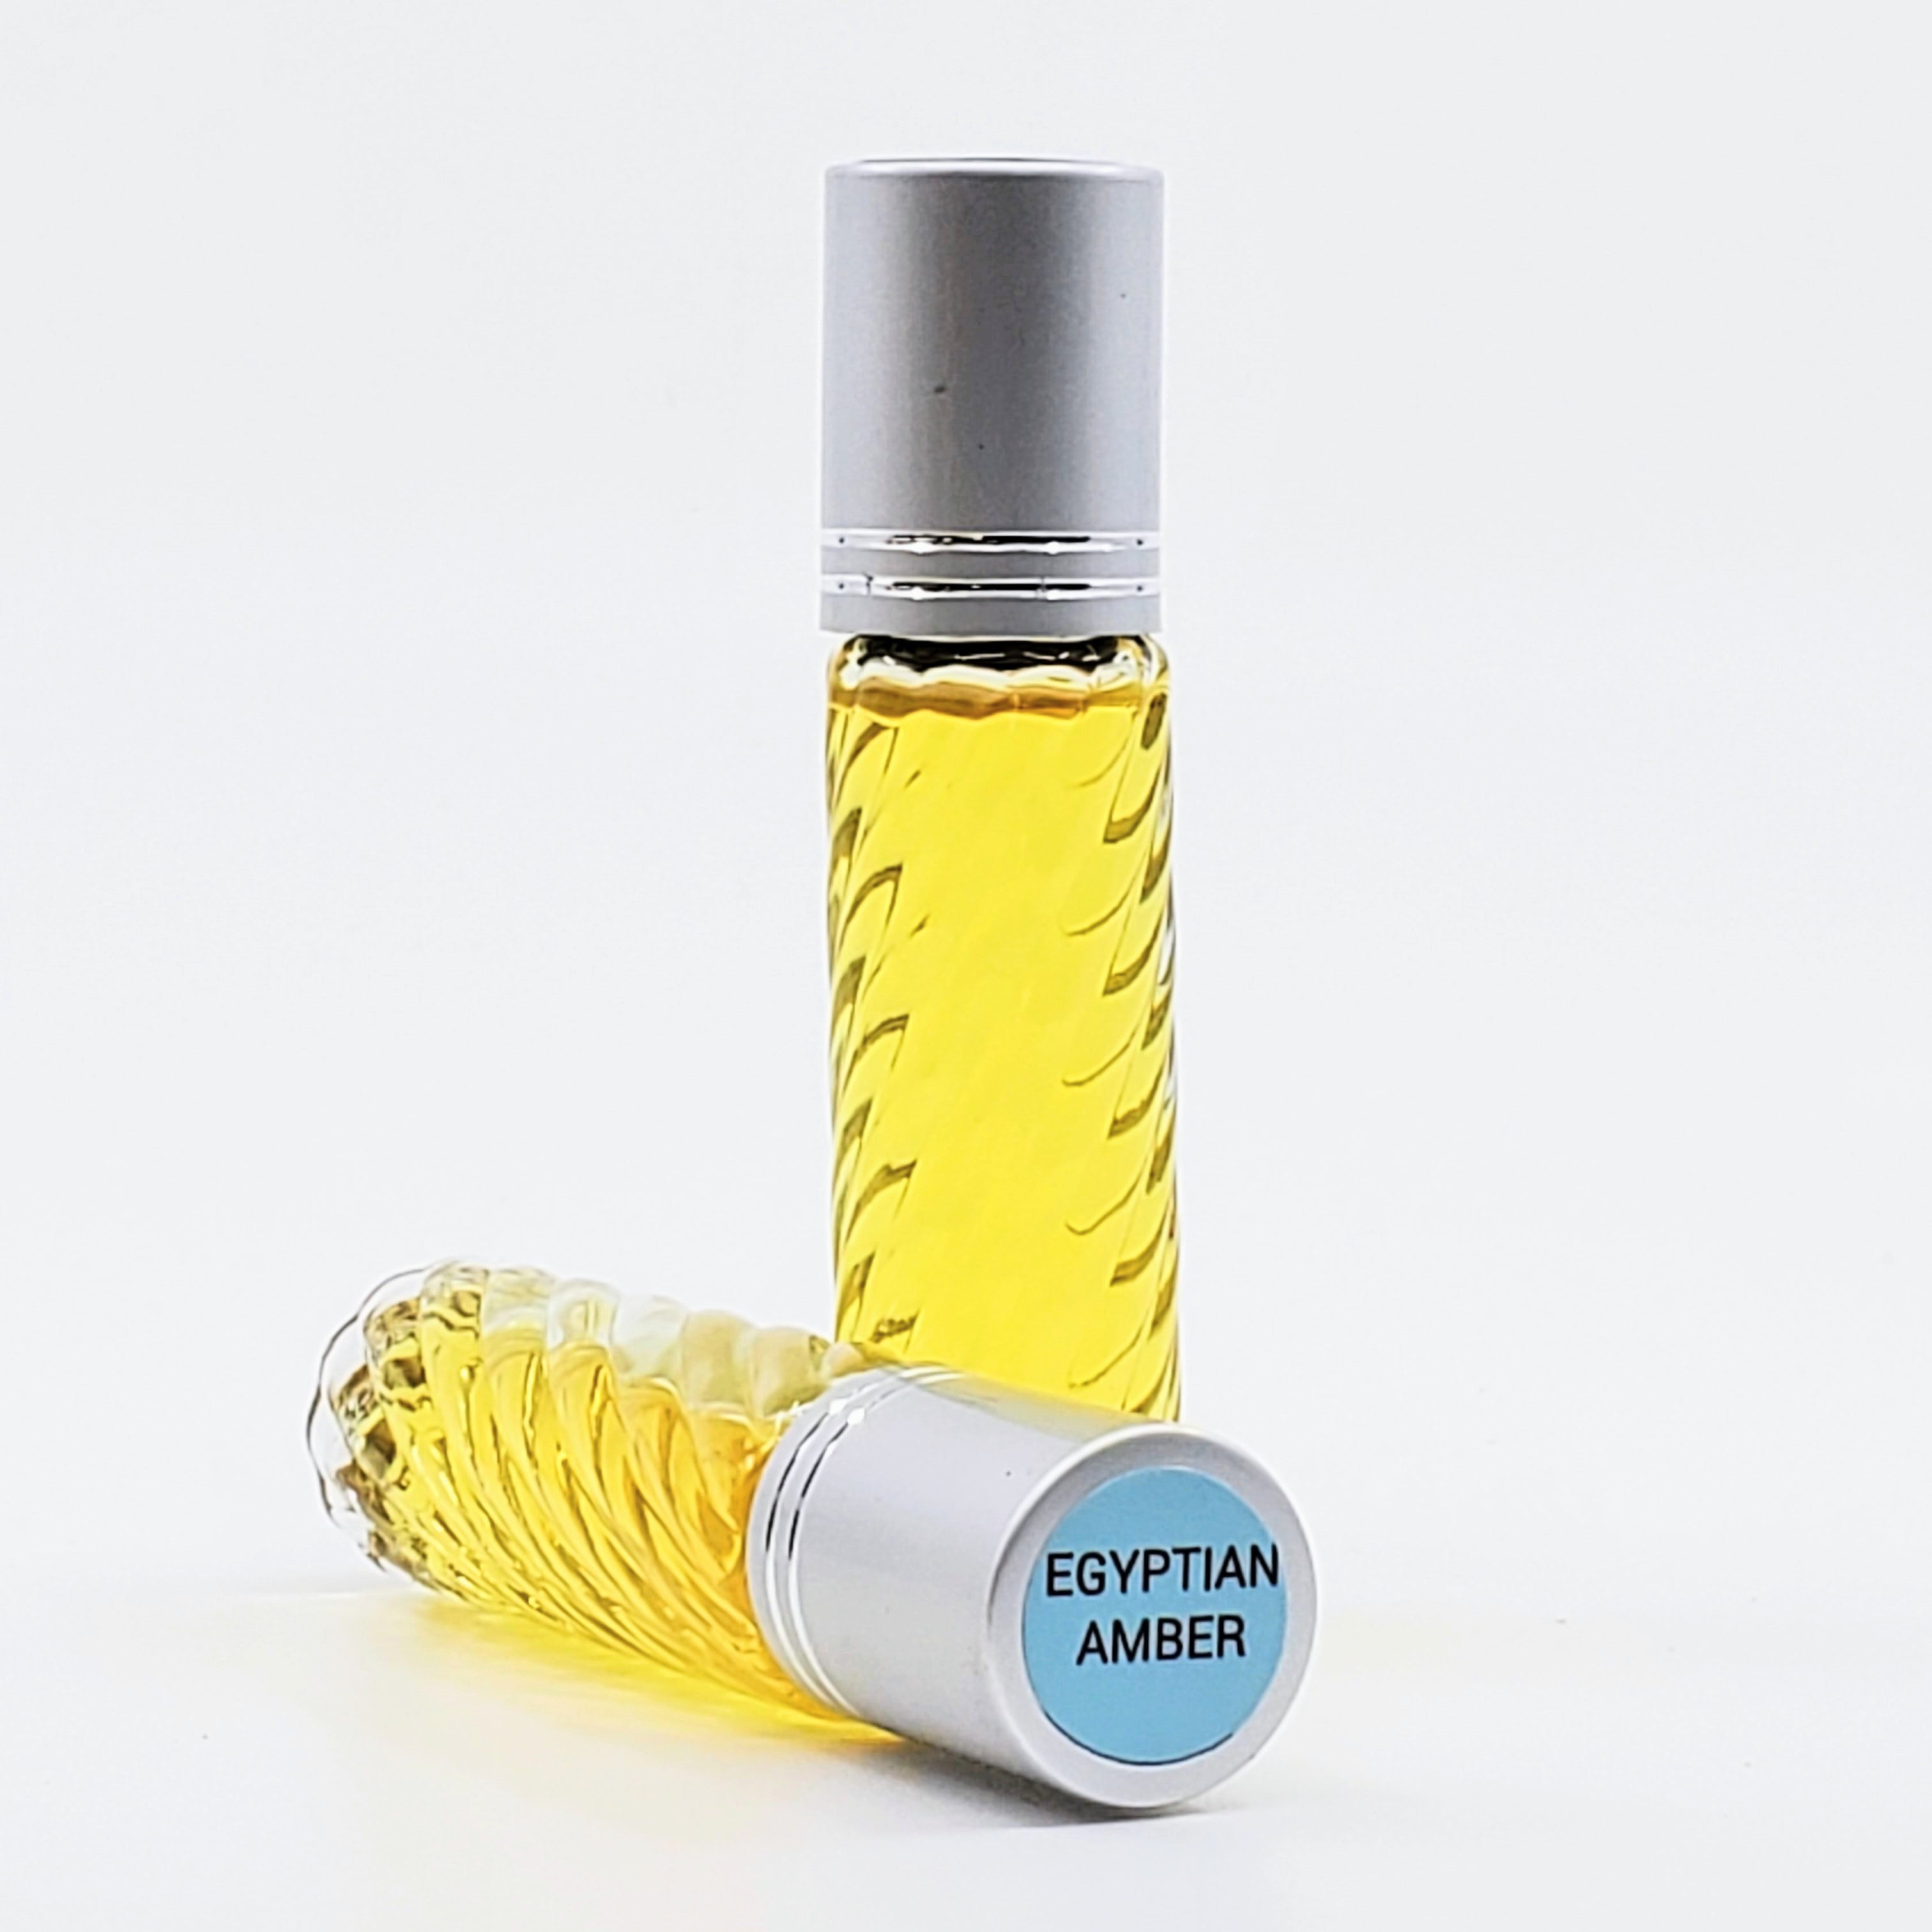 Egyptian Amber Pure Perfume Oil - The Mockingbird Apothecary & General Store